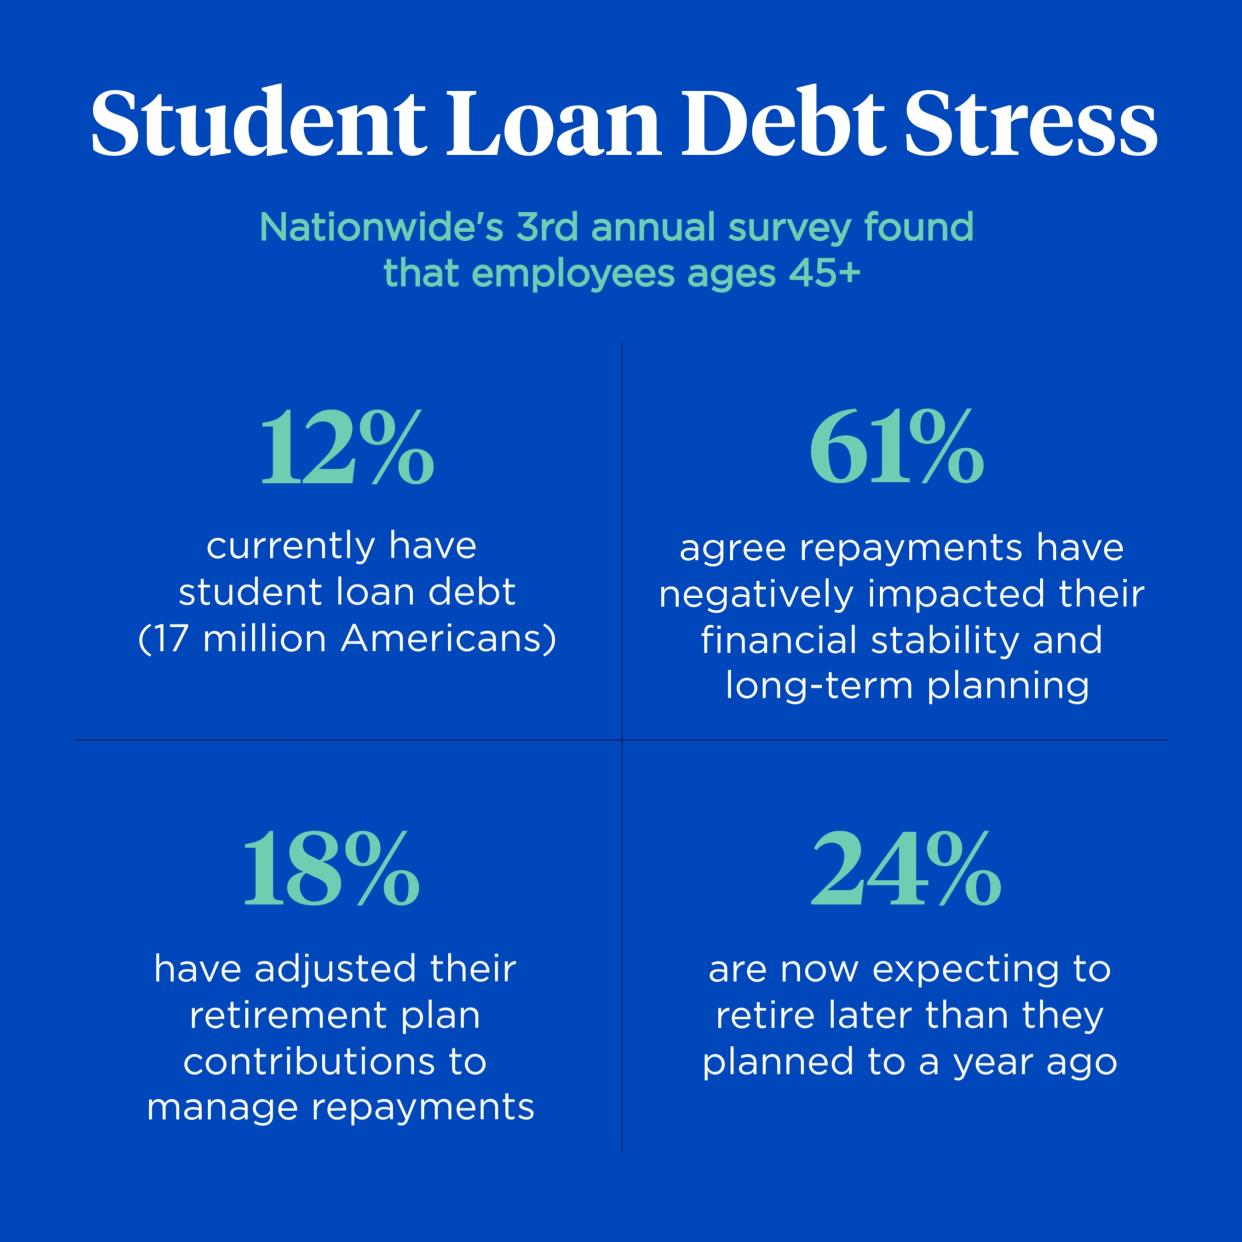 Nationwide 3rd Annual Survey on the impact of student loans on employees' retirement planning